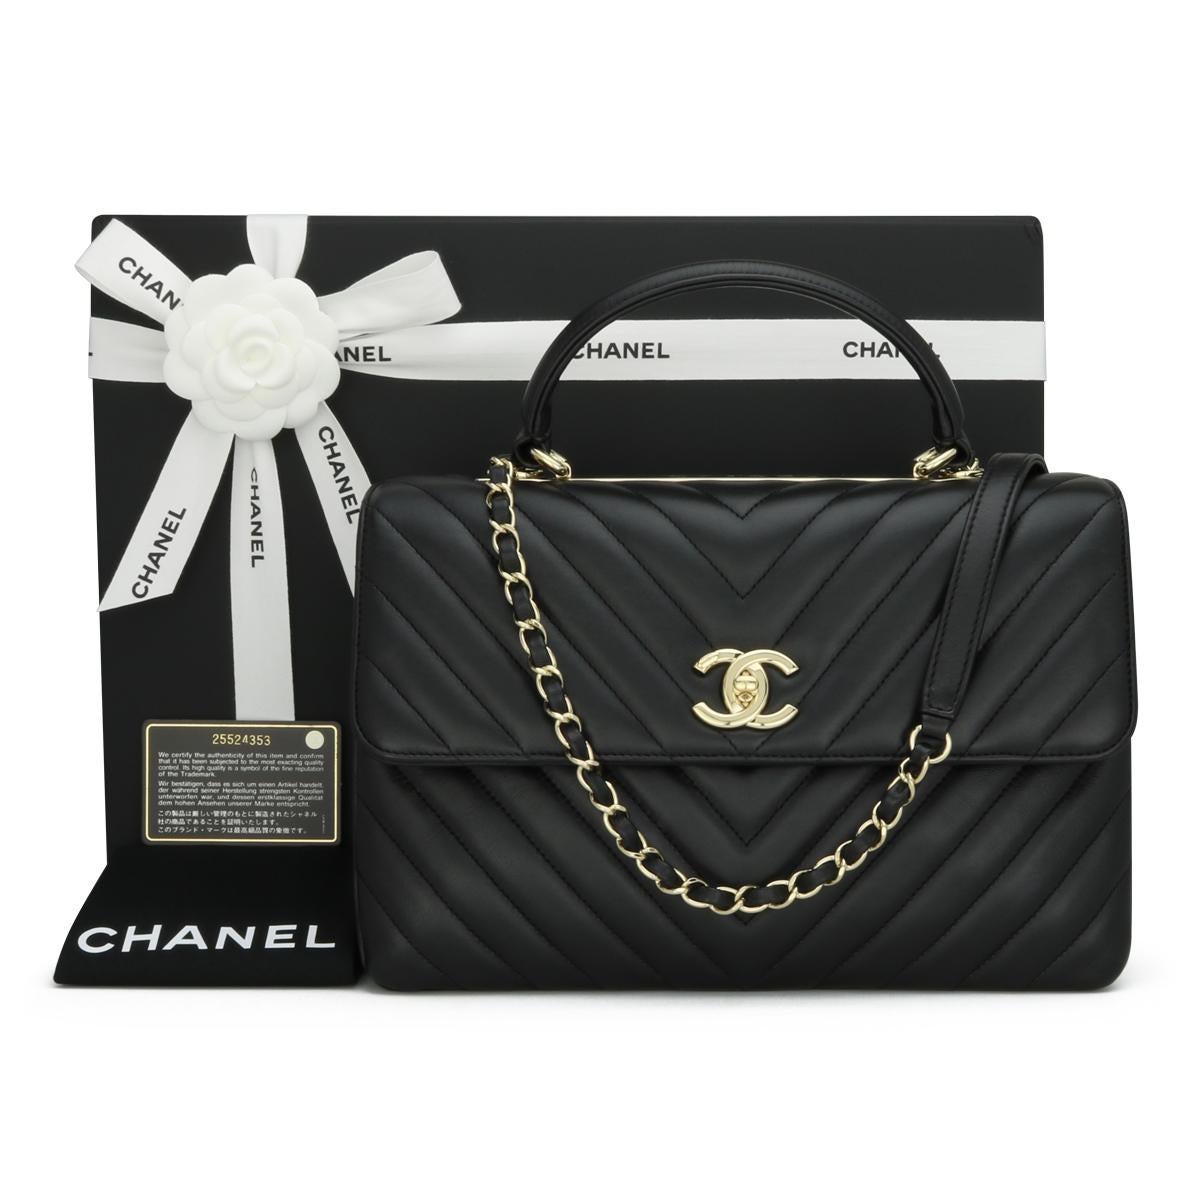 CHANEL Trendy CC Chevron Top Handle Bag Medium Black Lambskin with Light Gold-Tone Hardware 2018 – 18P.

This stunning bag is in very good condition. It still holds its original shape, and the hardware is very shiny. 

This top-handle bag is